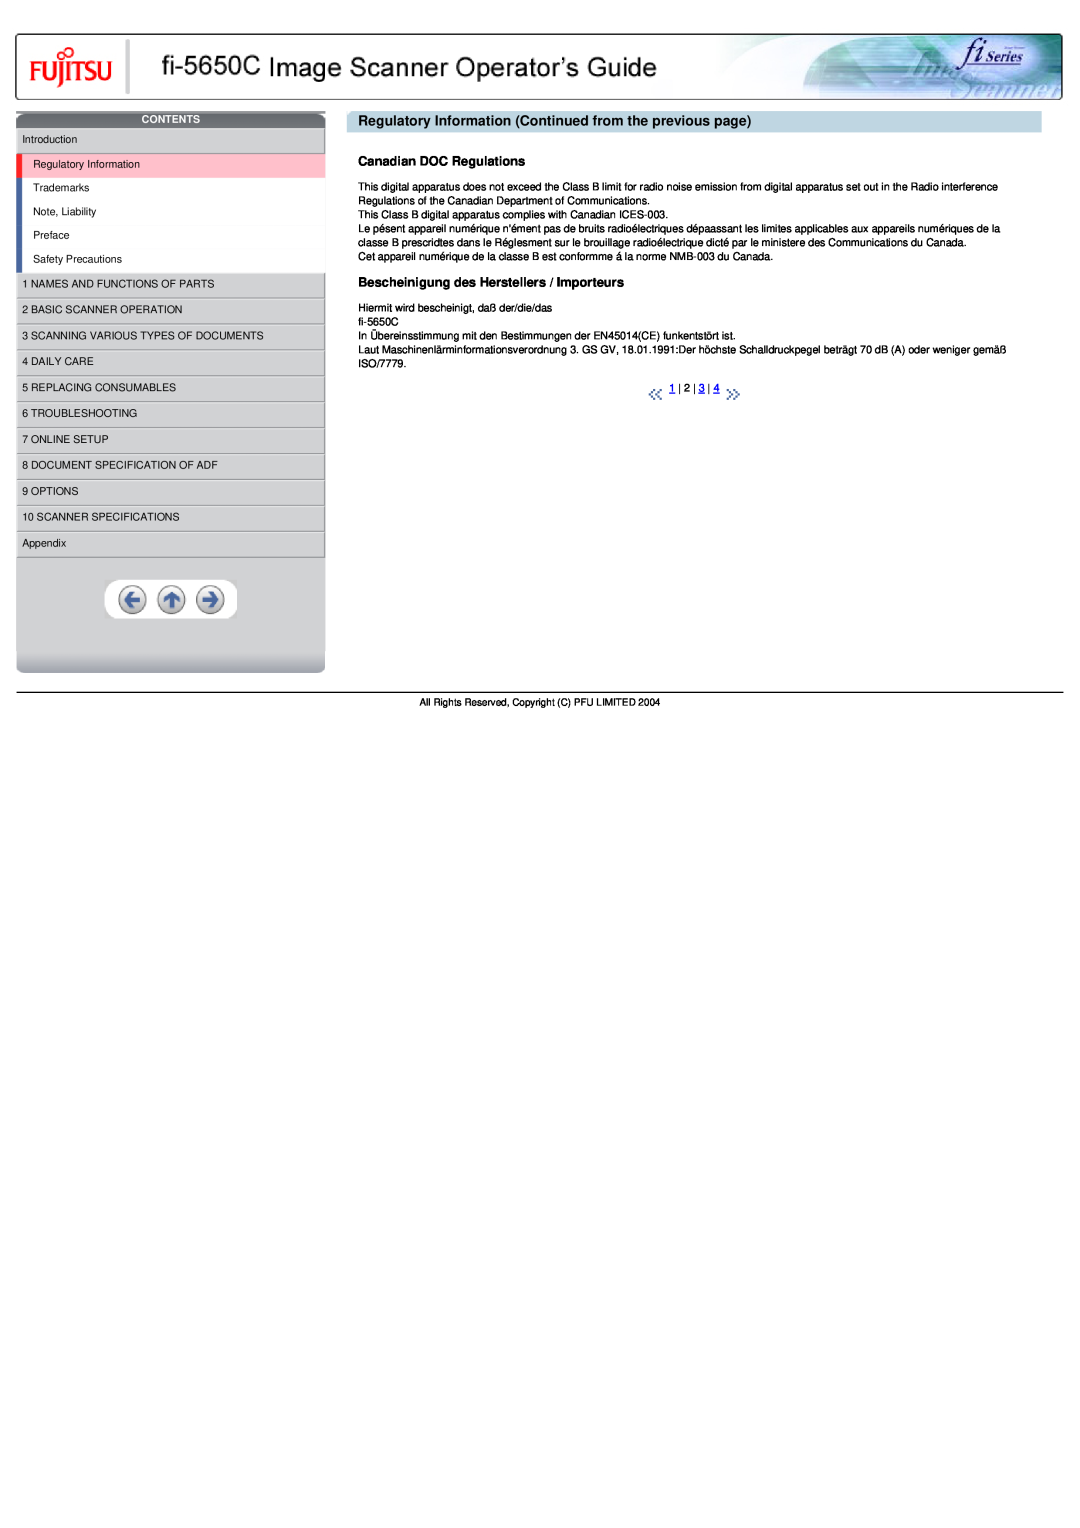 Fujitsu fi-5650C specifications Regulatory Information Continued from the previous page, Canadian DOC Regulations, Contents 